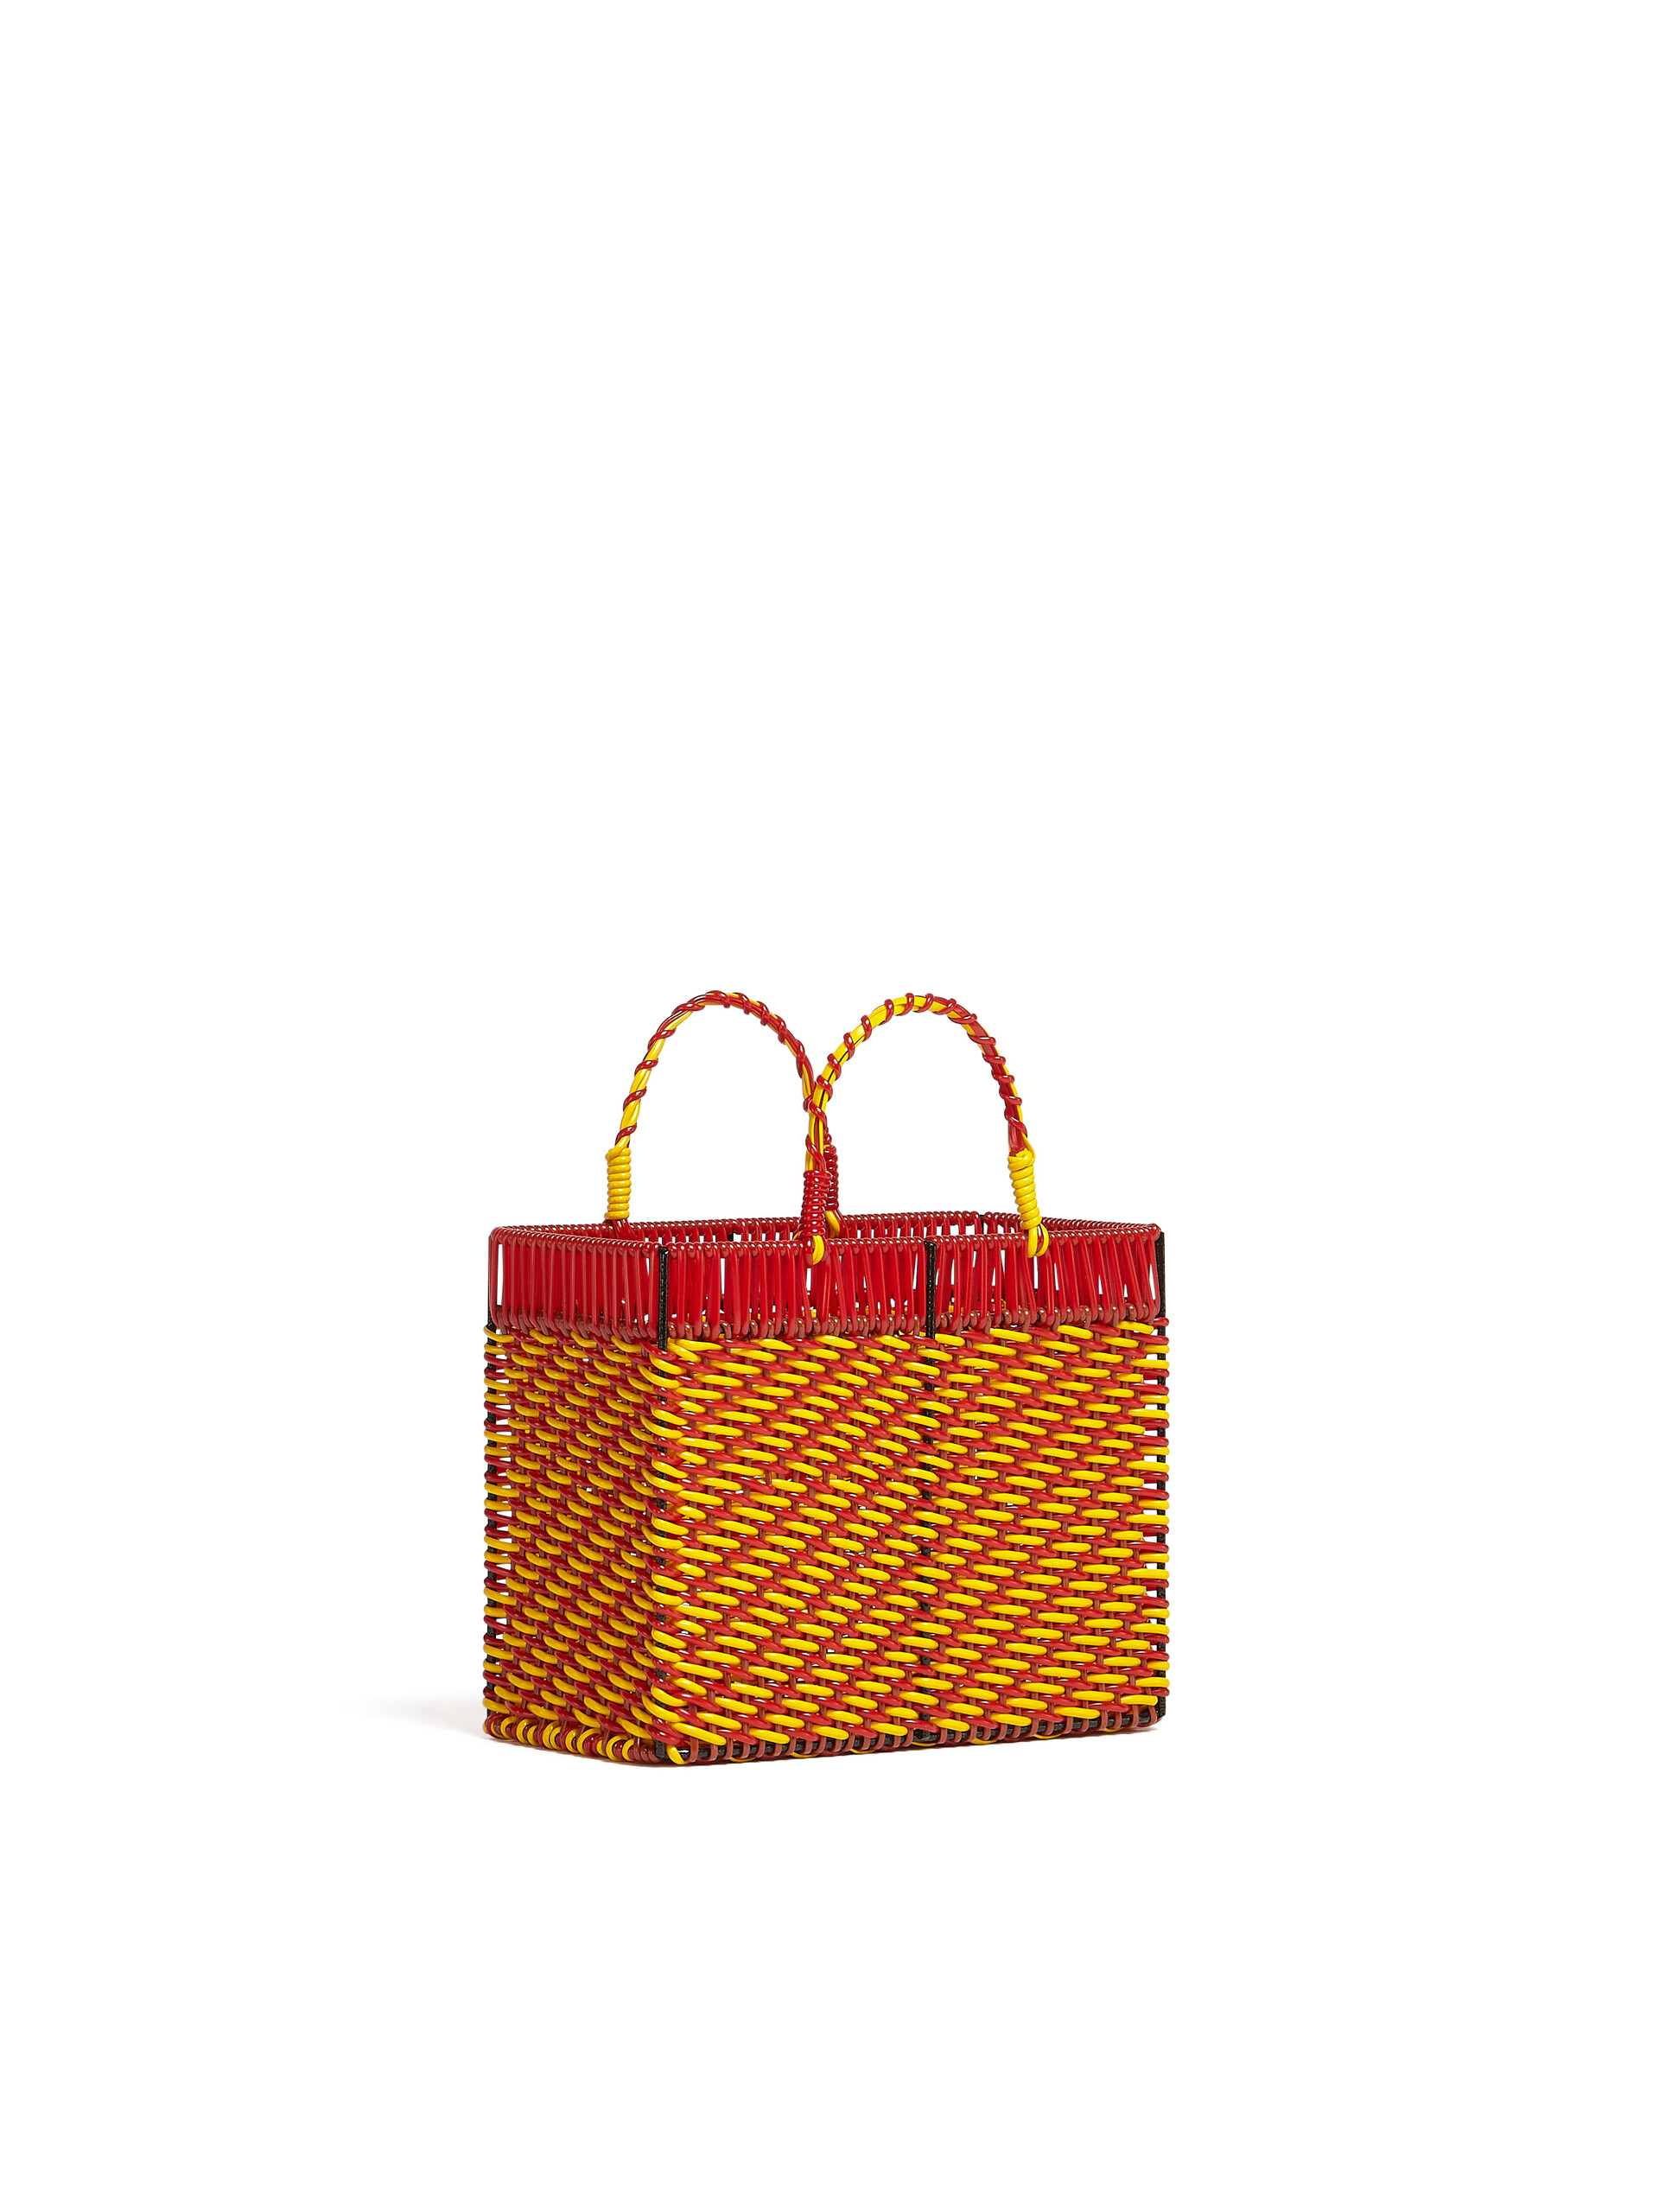 MARNI MARKET basket in iron and orange and red PVC - Home Accessories - Image 2